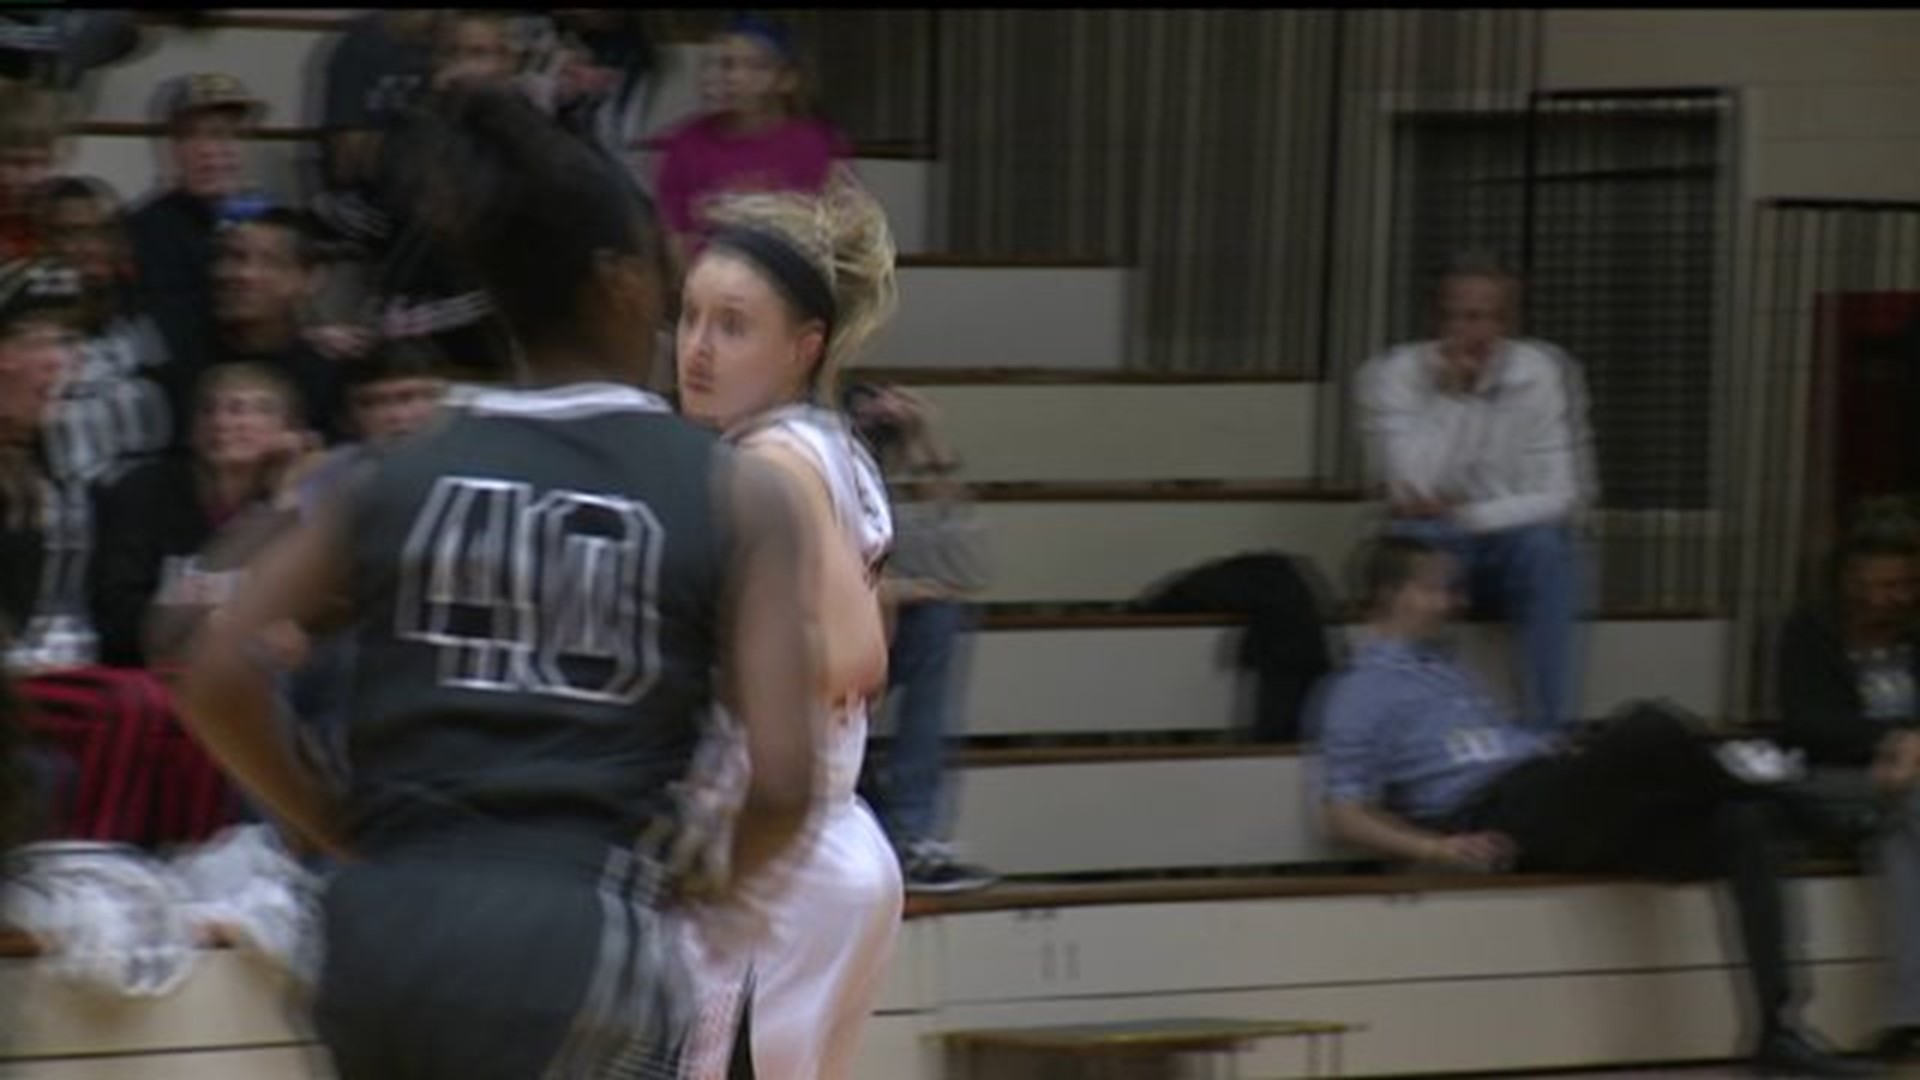 Lady Panthers edge Galesburg